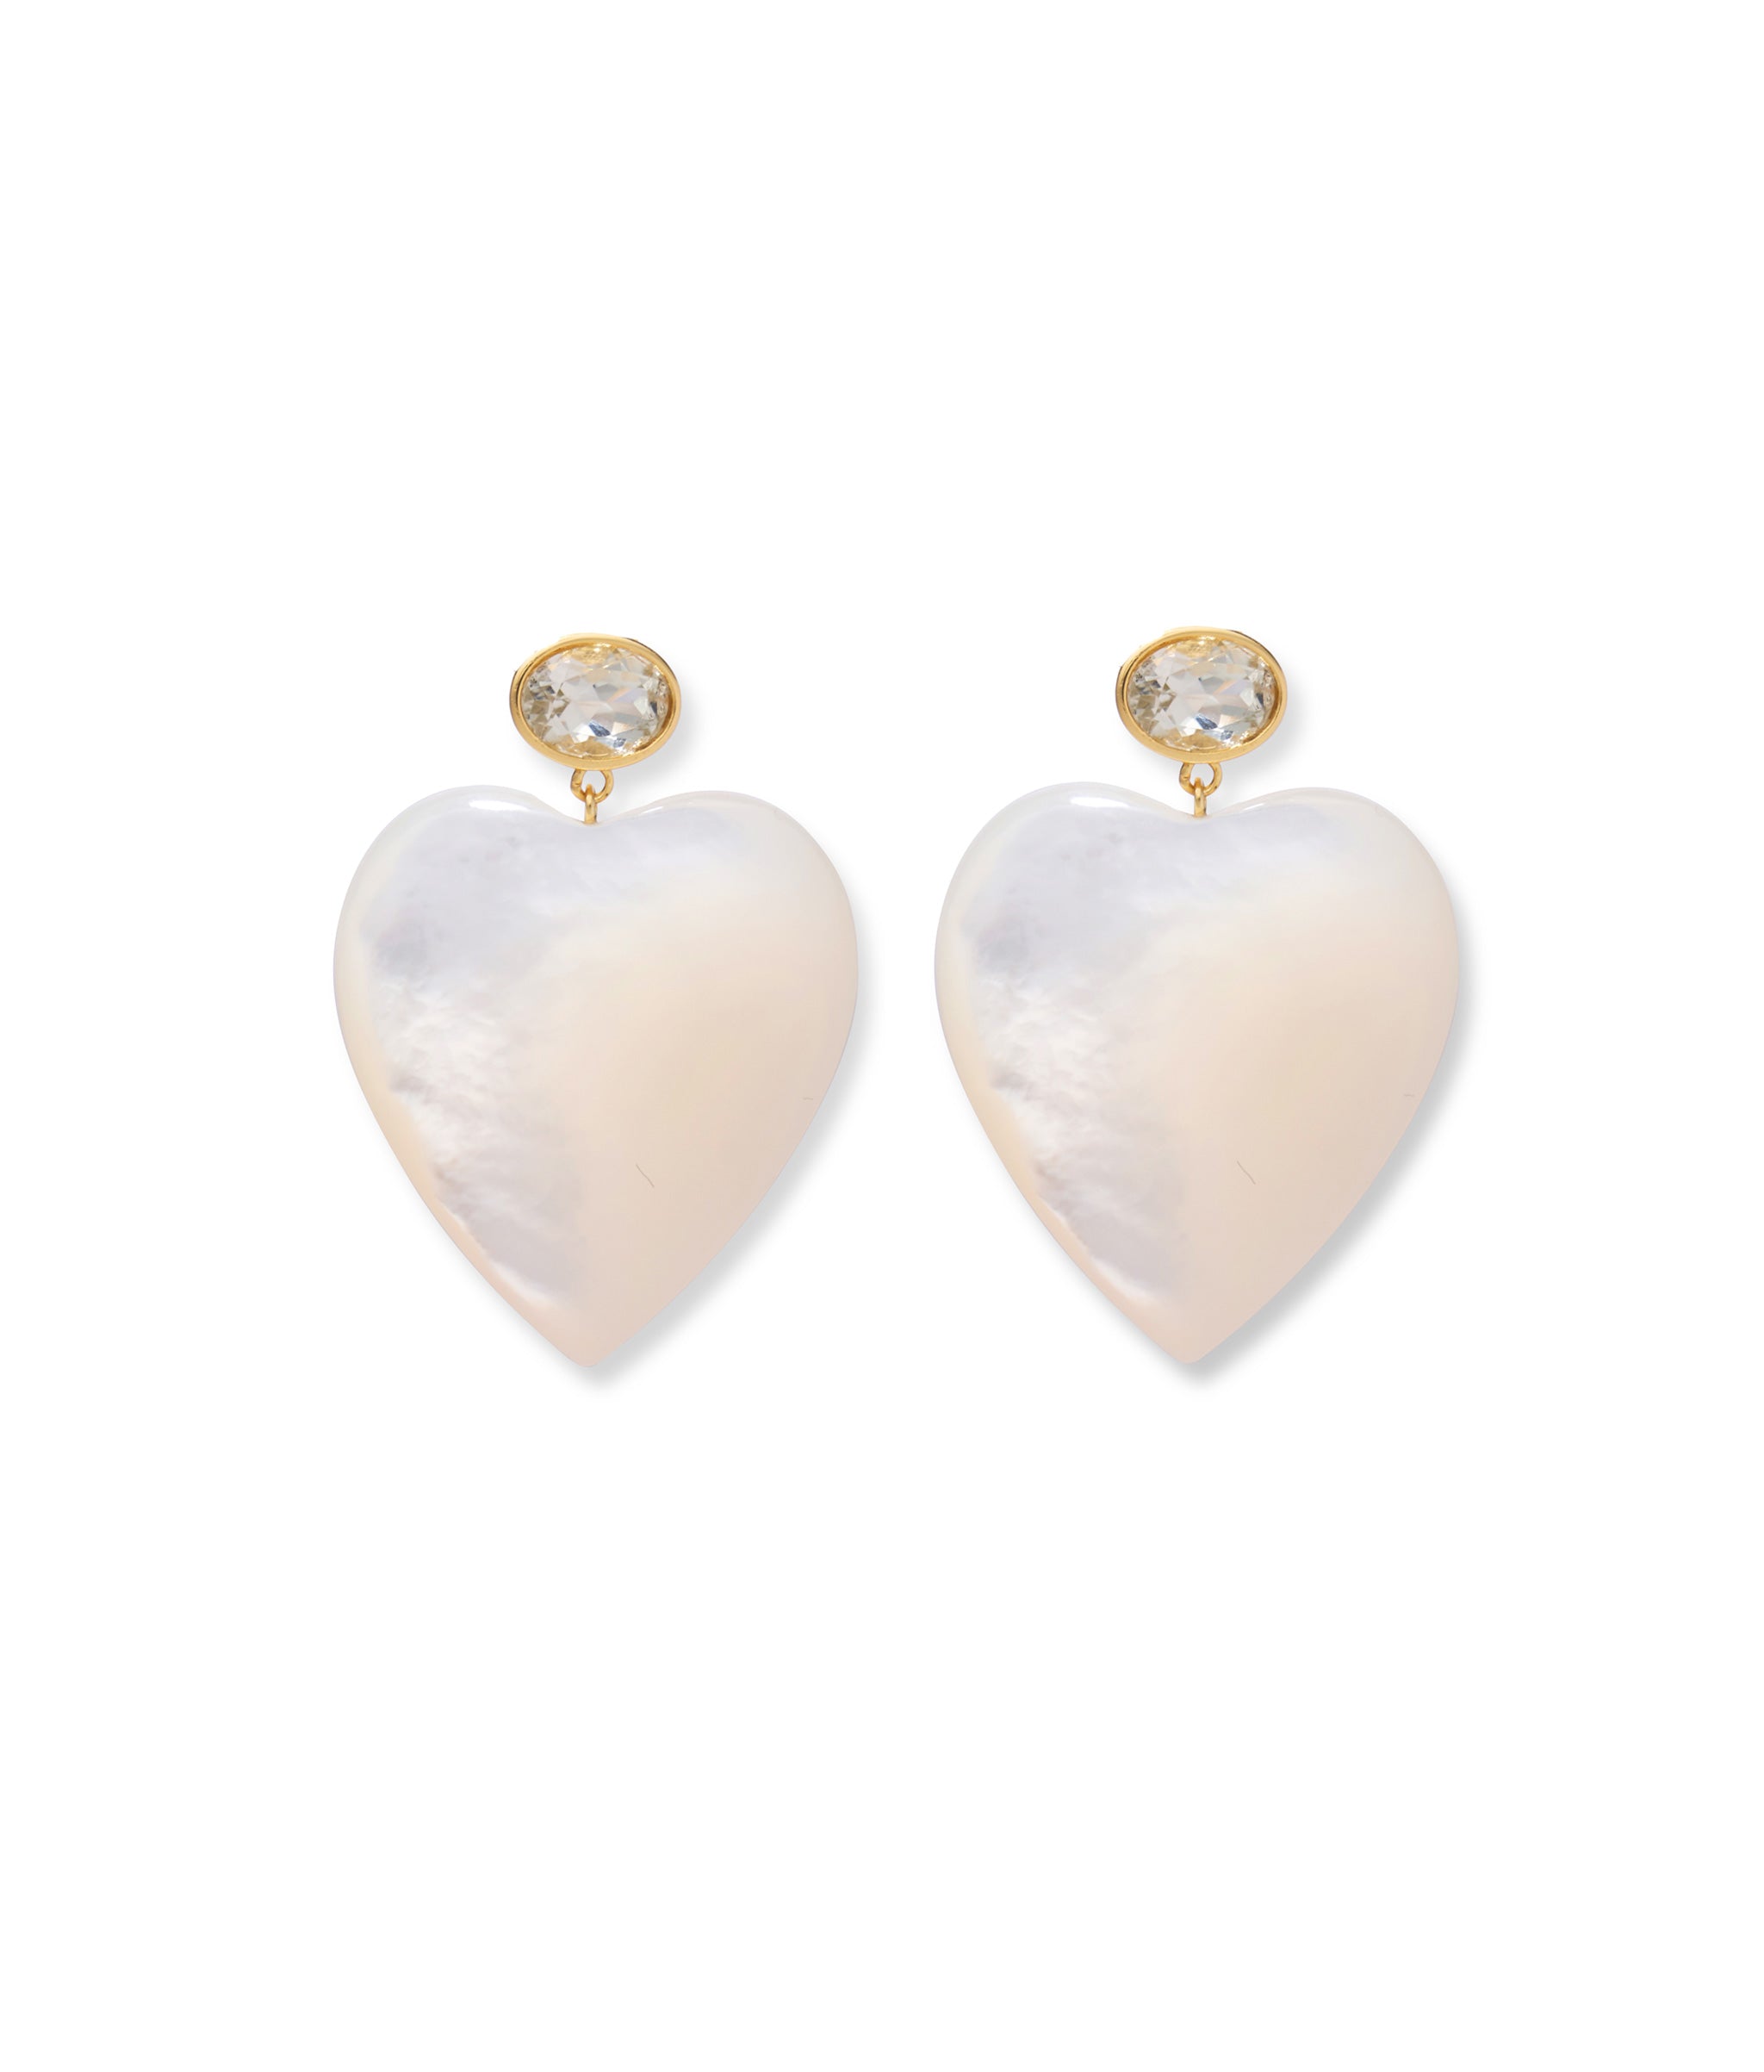 Valentina Earrings. With faceted green amethyst tops and large hanging mother-of-pearl heart drops.